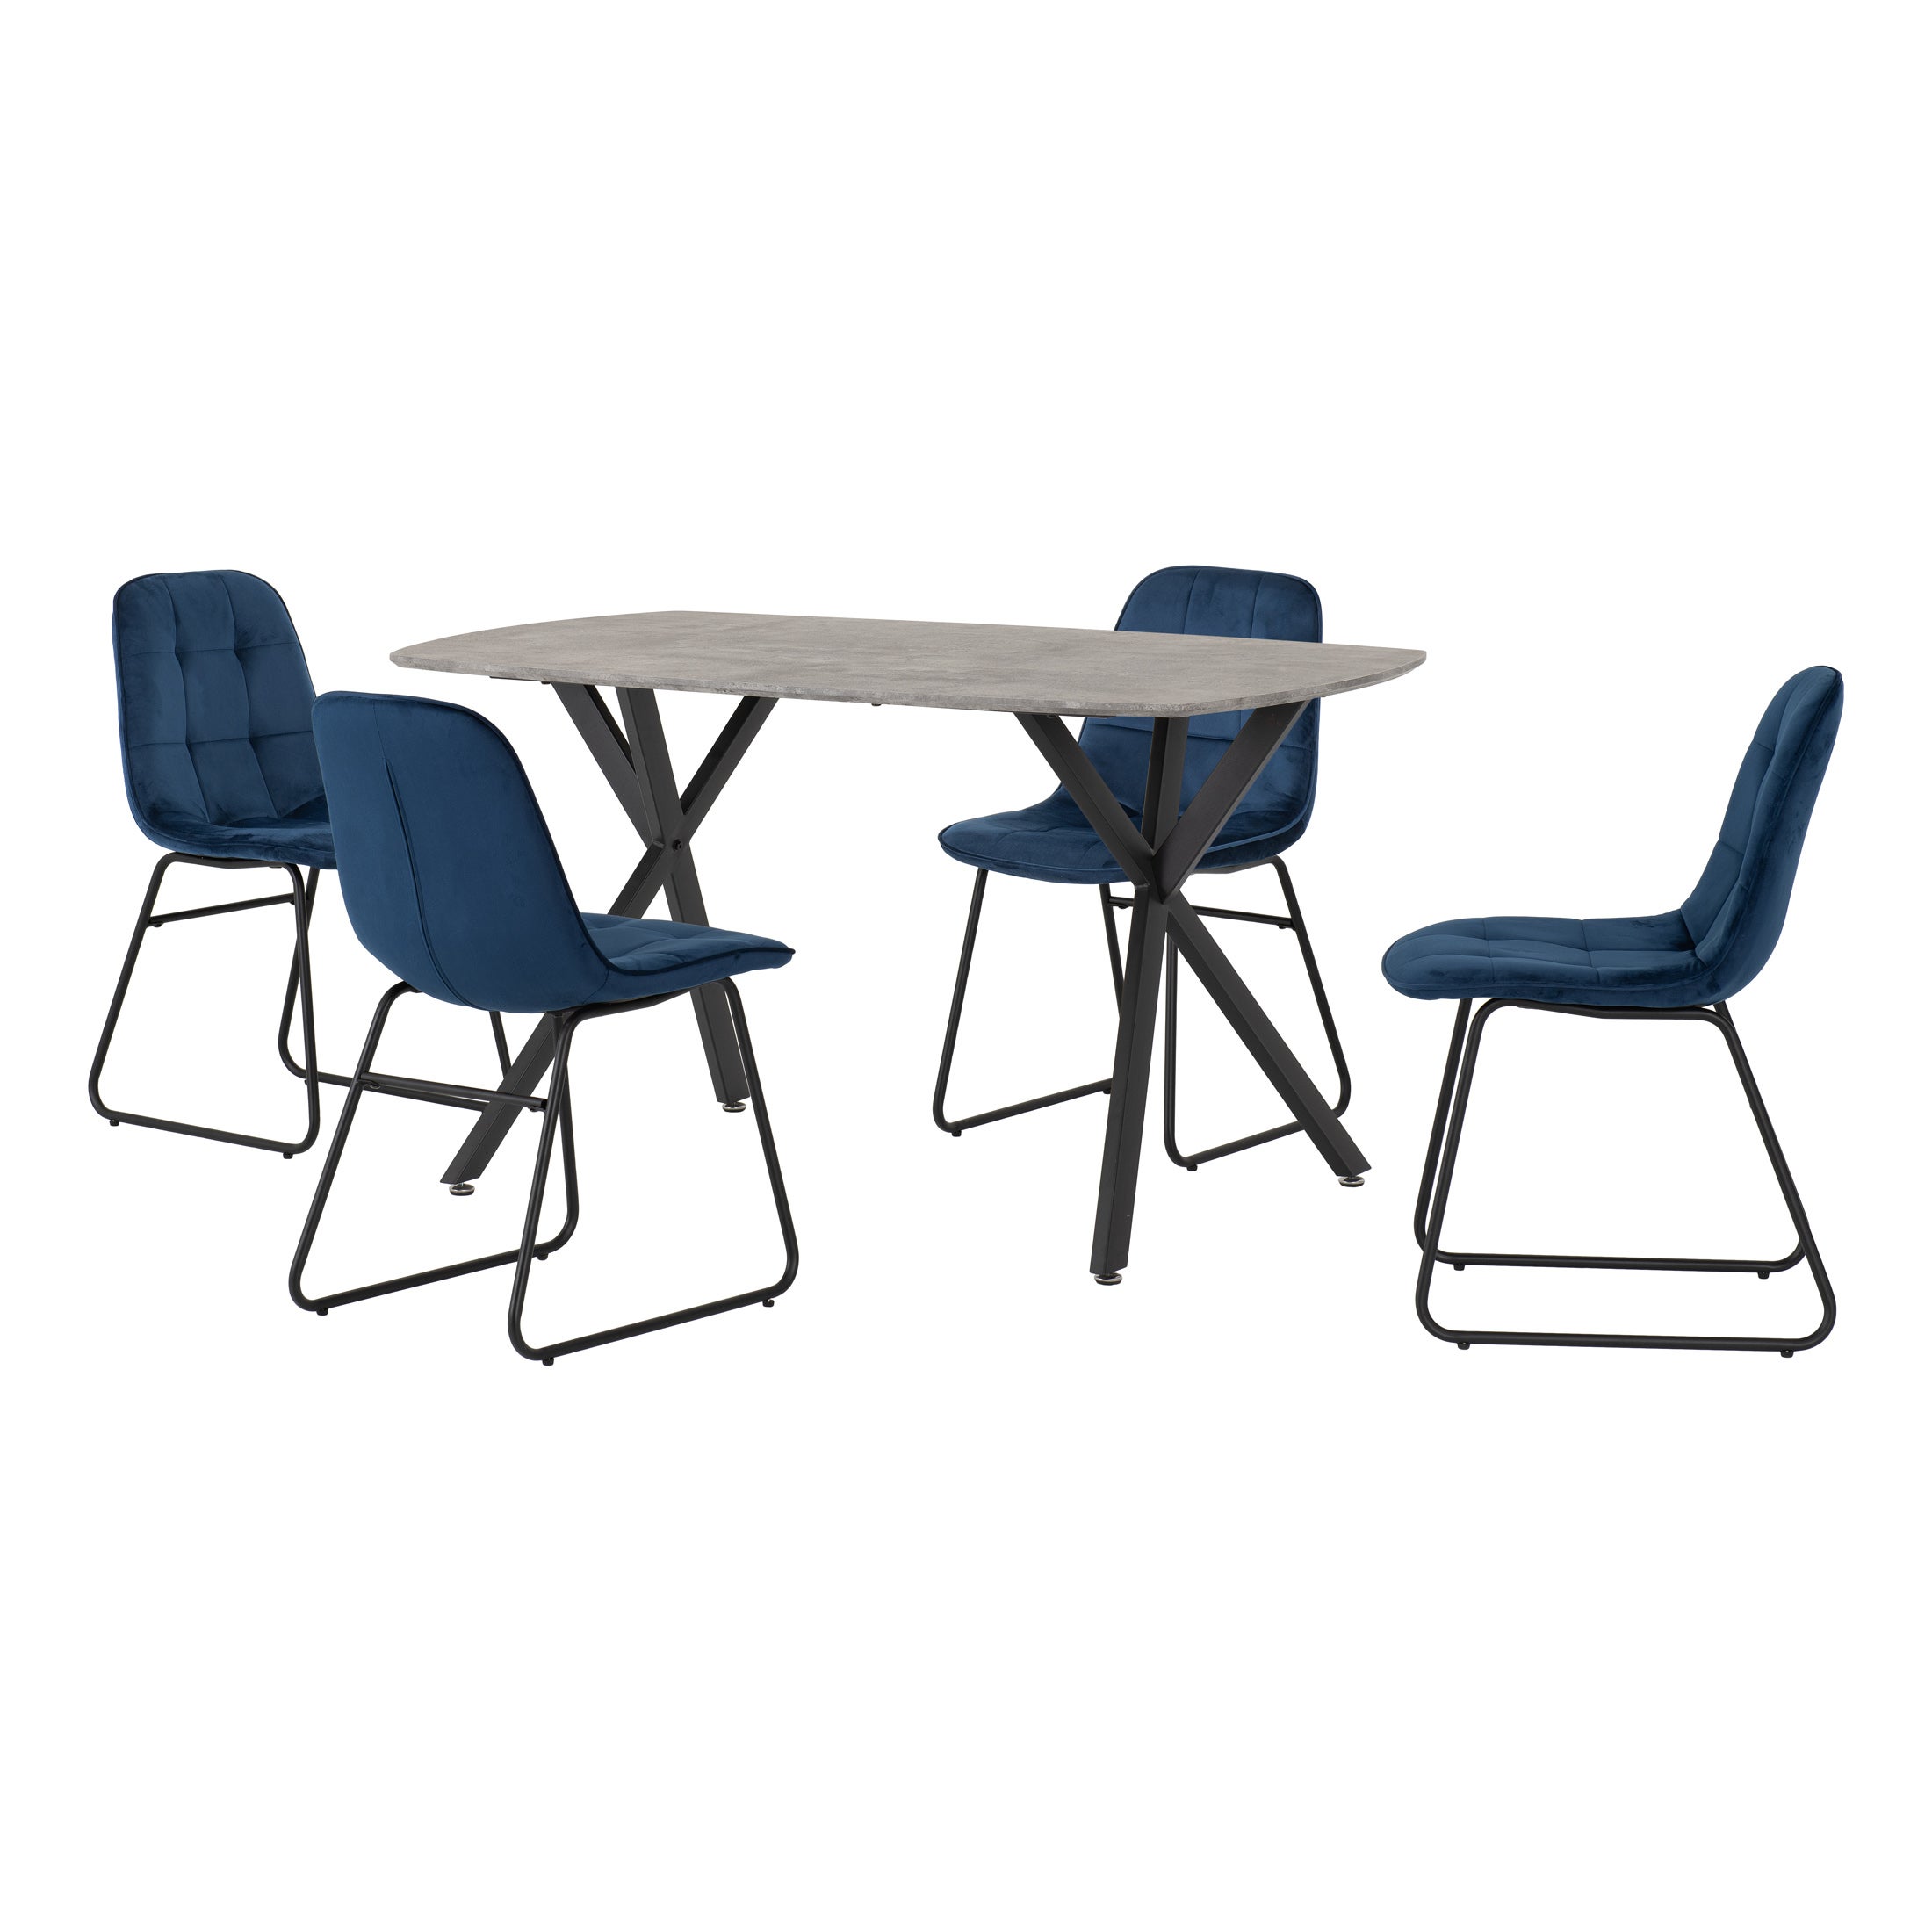 Athens Rectangular Dining Table With 4 Lukas Chairs Concrete Effect Navy Blue